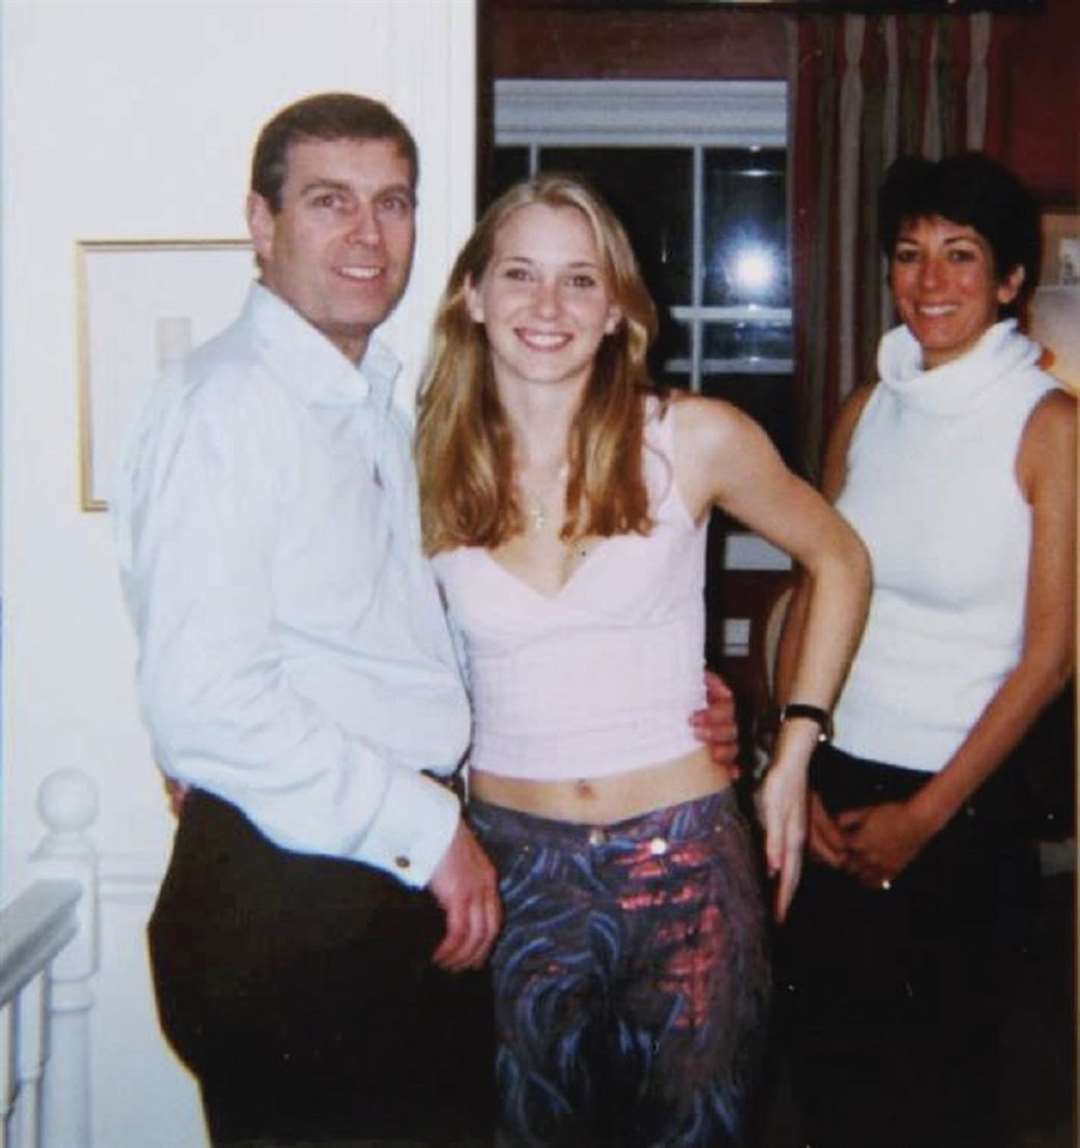 Photo issued by the US Department of Justice the Duke of York, Virginia Giuffre, and Ghislaine Maxwell (US Department of Justice/PA)